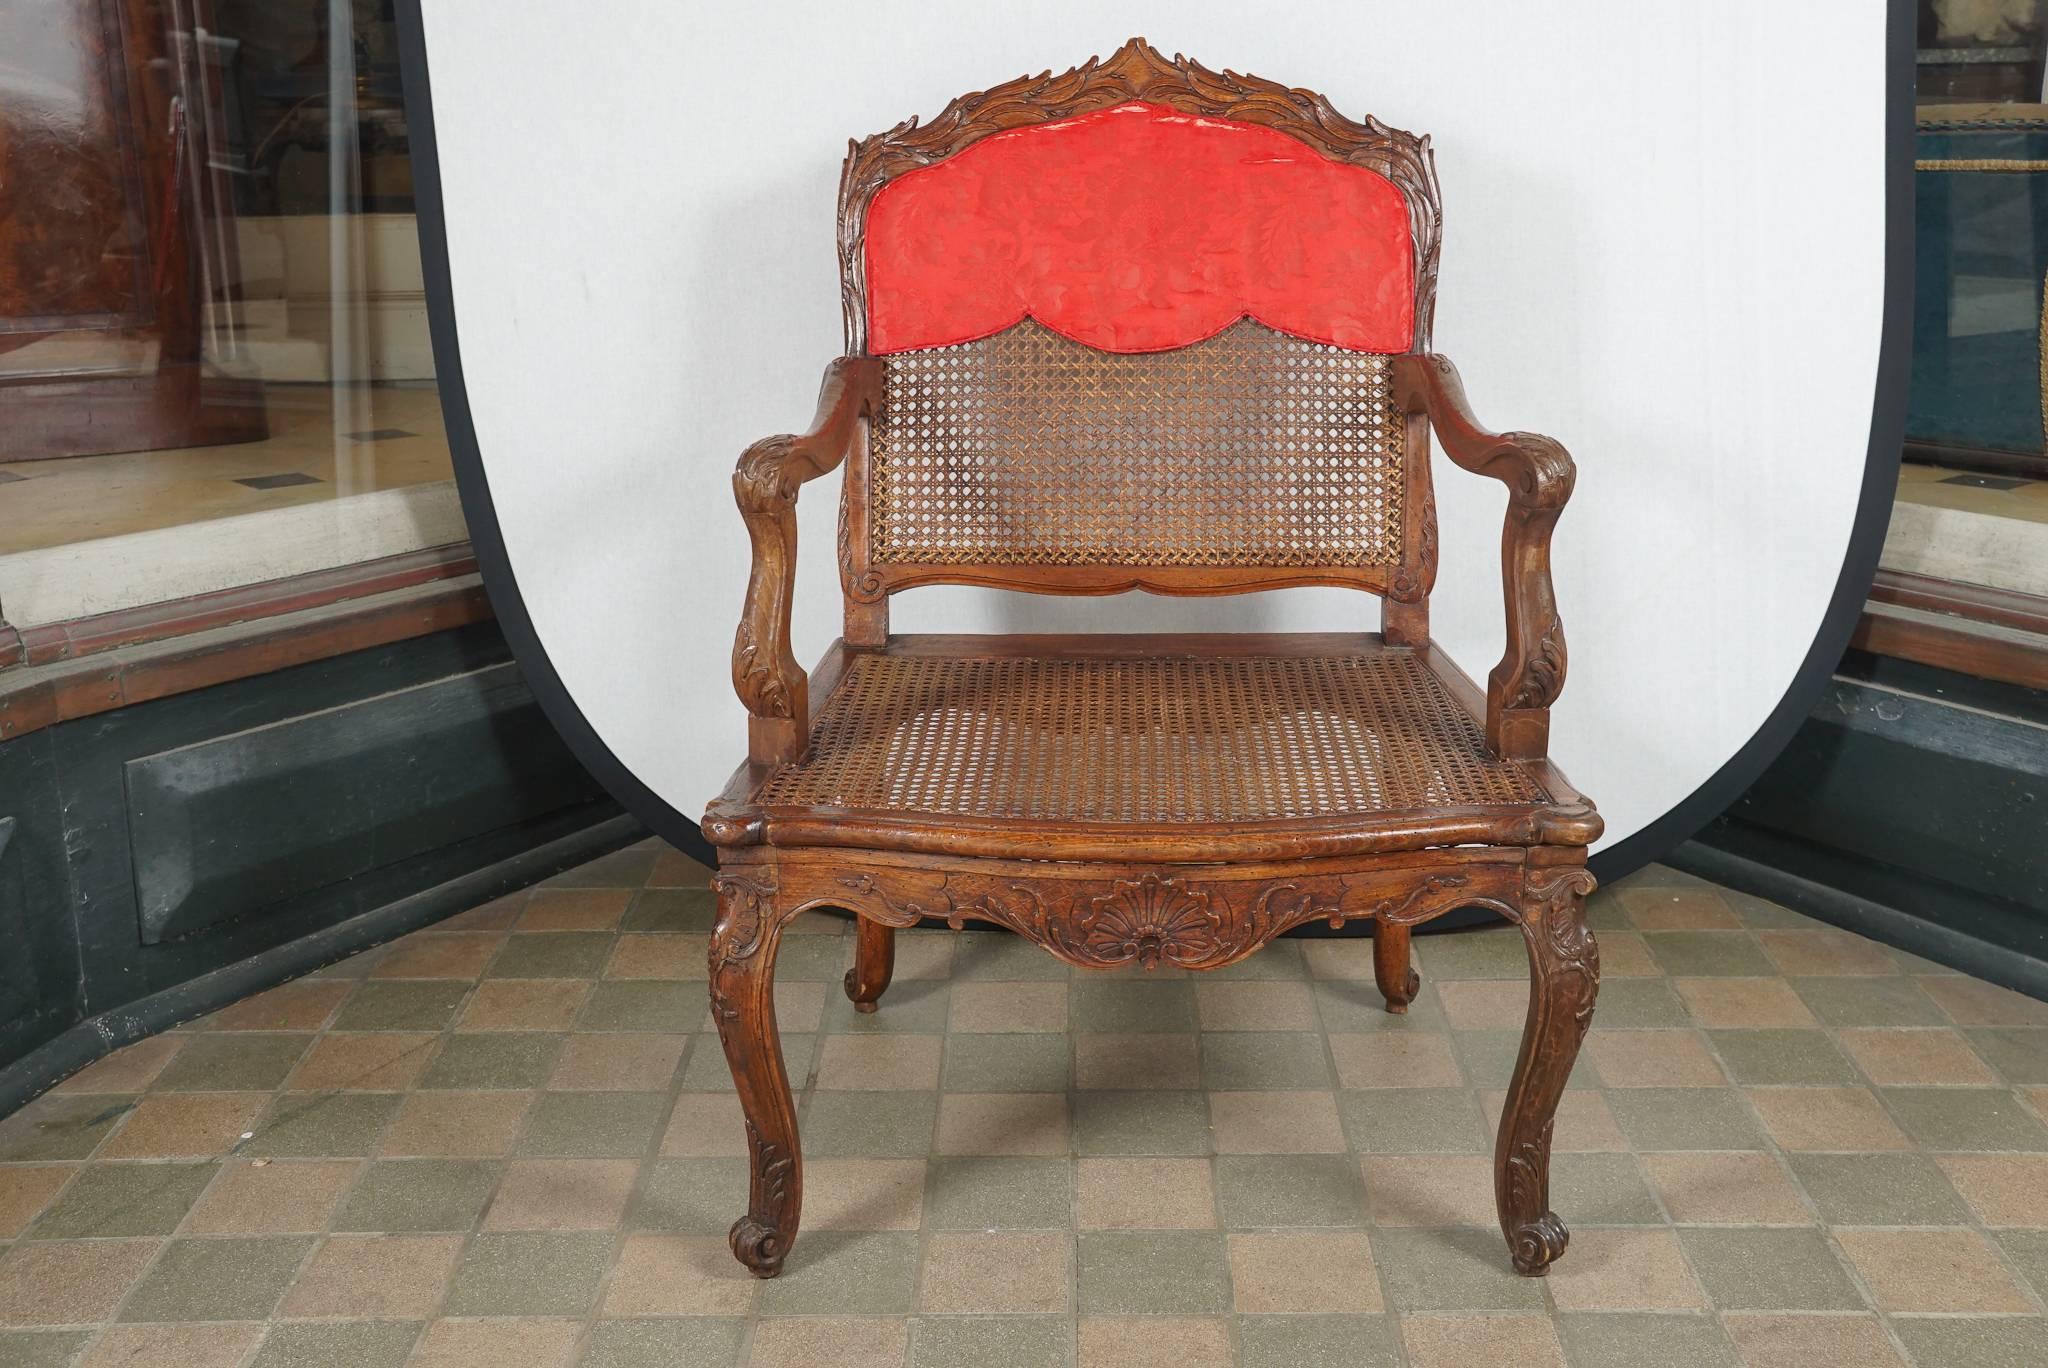 This lovely fine fauteuil a la reine or straight-backed open armchair is carved from beechwood and finished out for light and airy effect in a caned seat and back. The chair formed part of the New York City Home from the estate of Monique Uzielli,